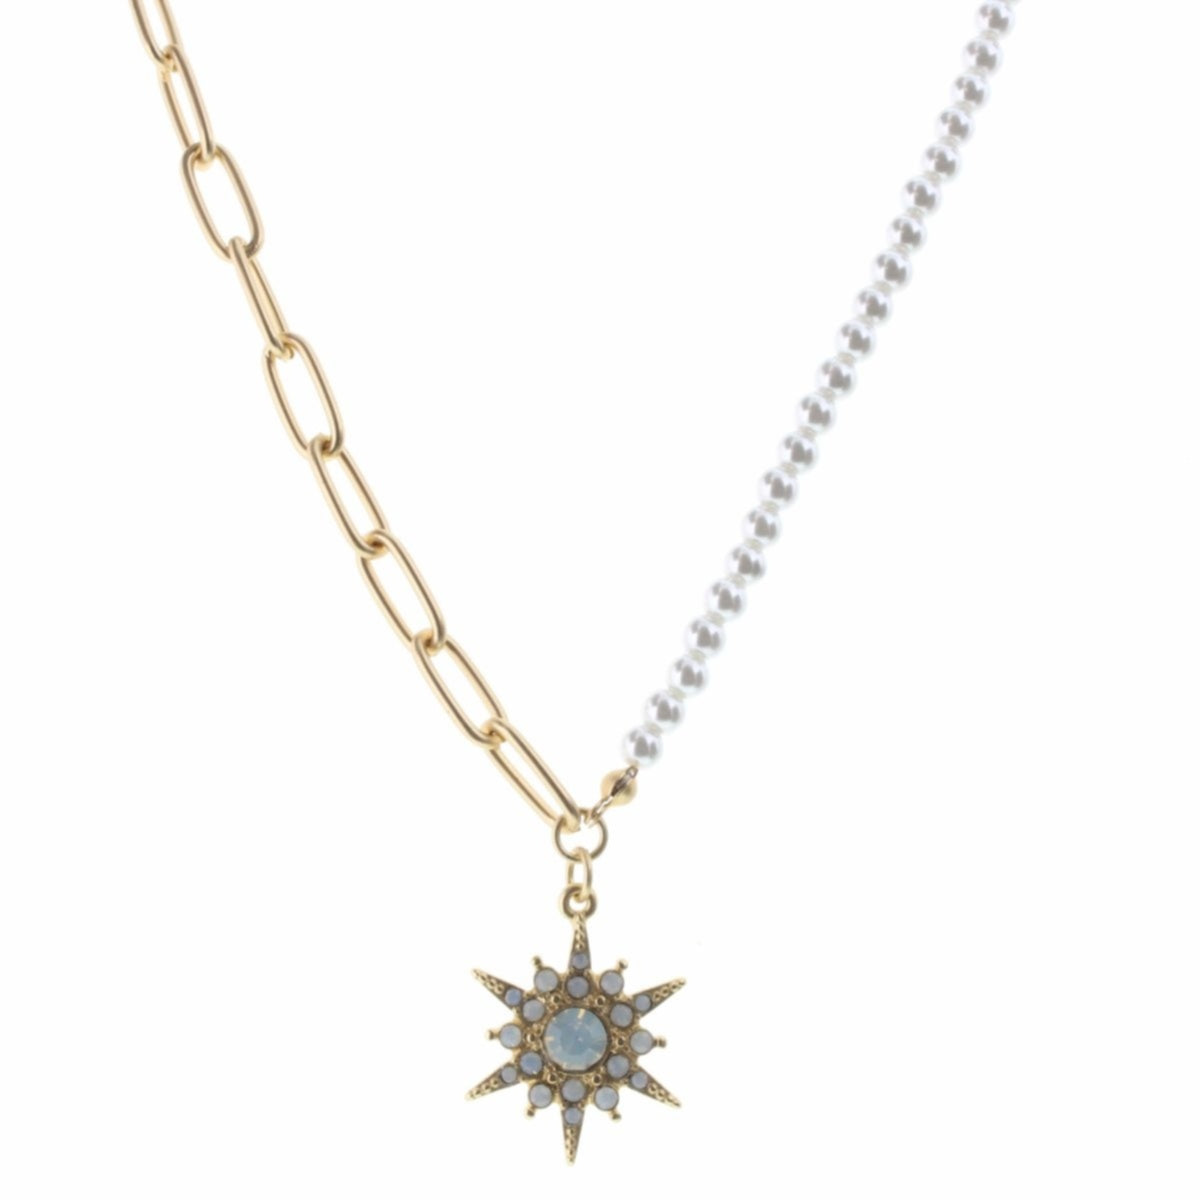 16" Pearl & Gold Chain with Czech Embellishment Star Necklace